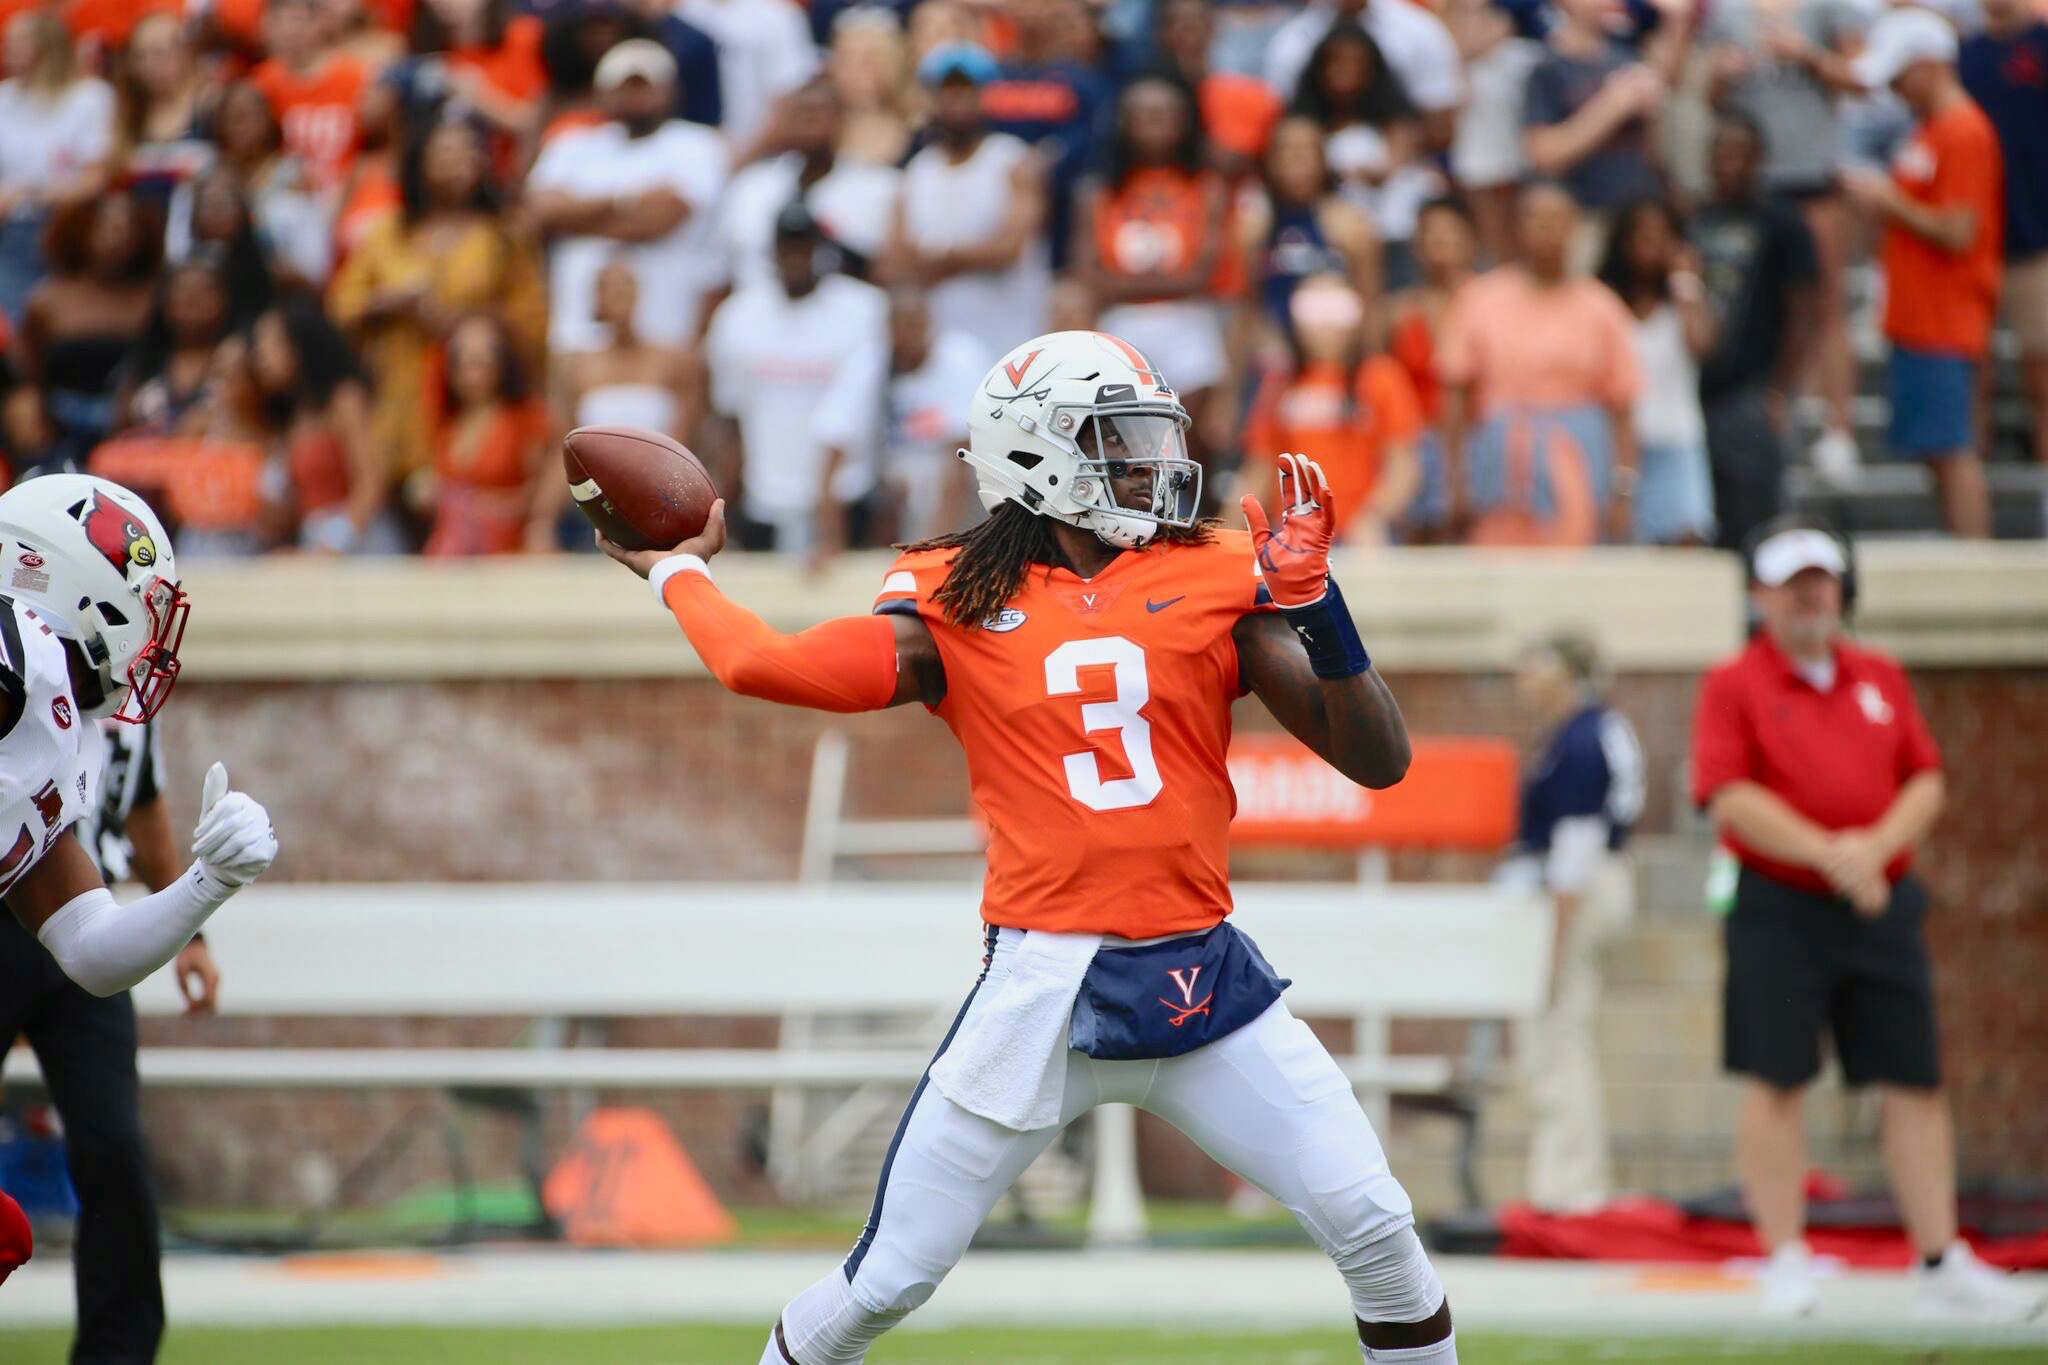 Quarterback Bryce Perkins throws the ball down the field during a game